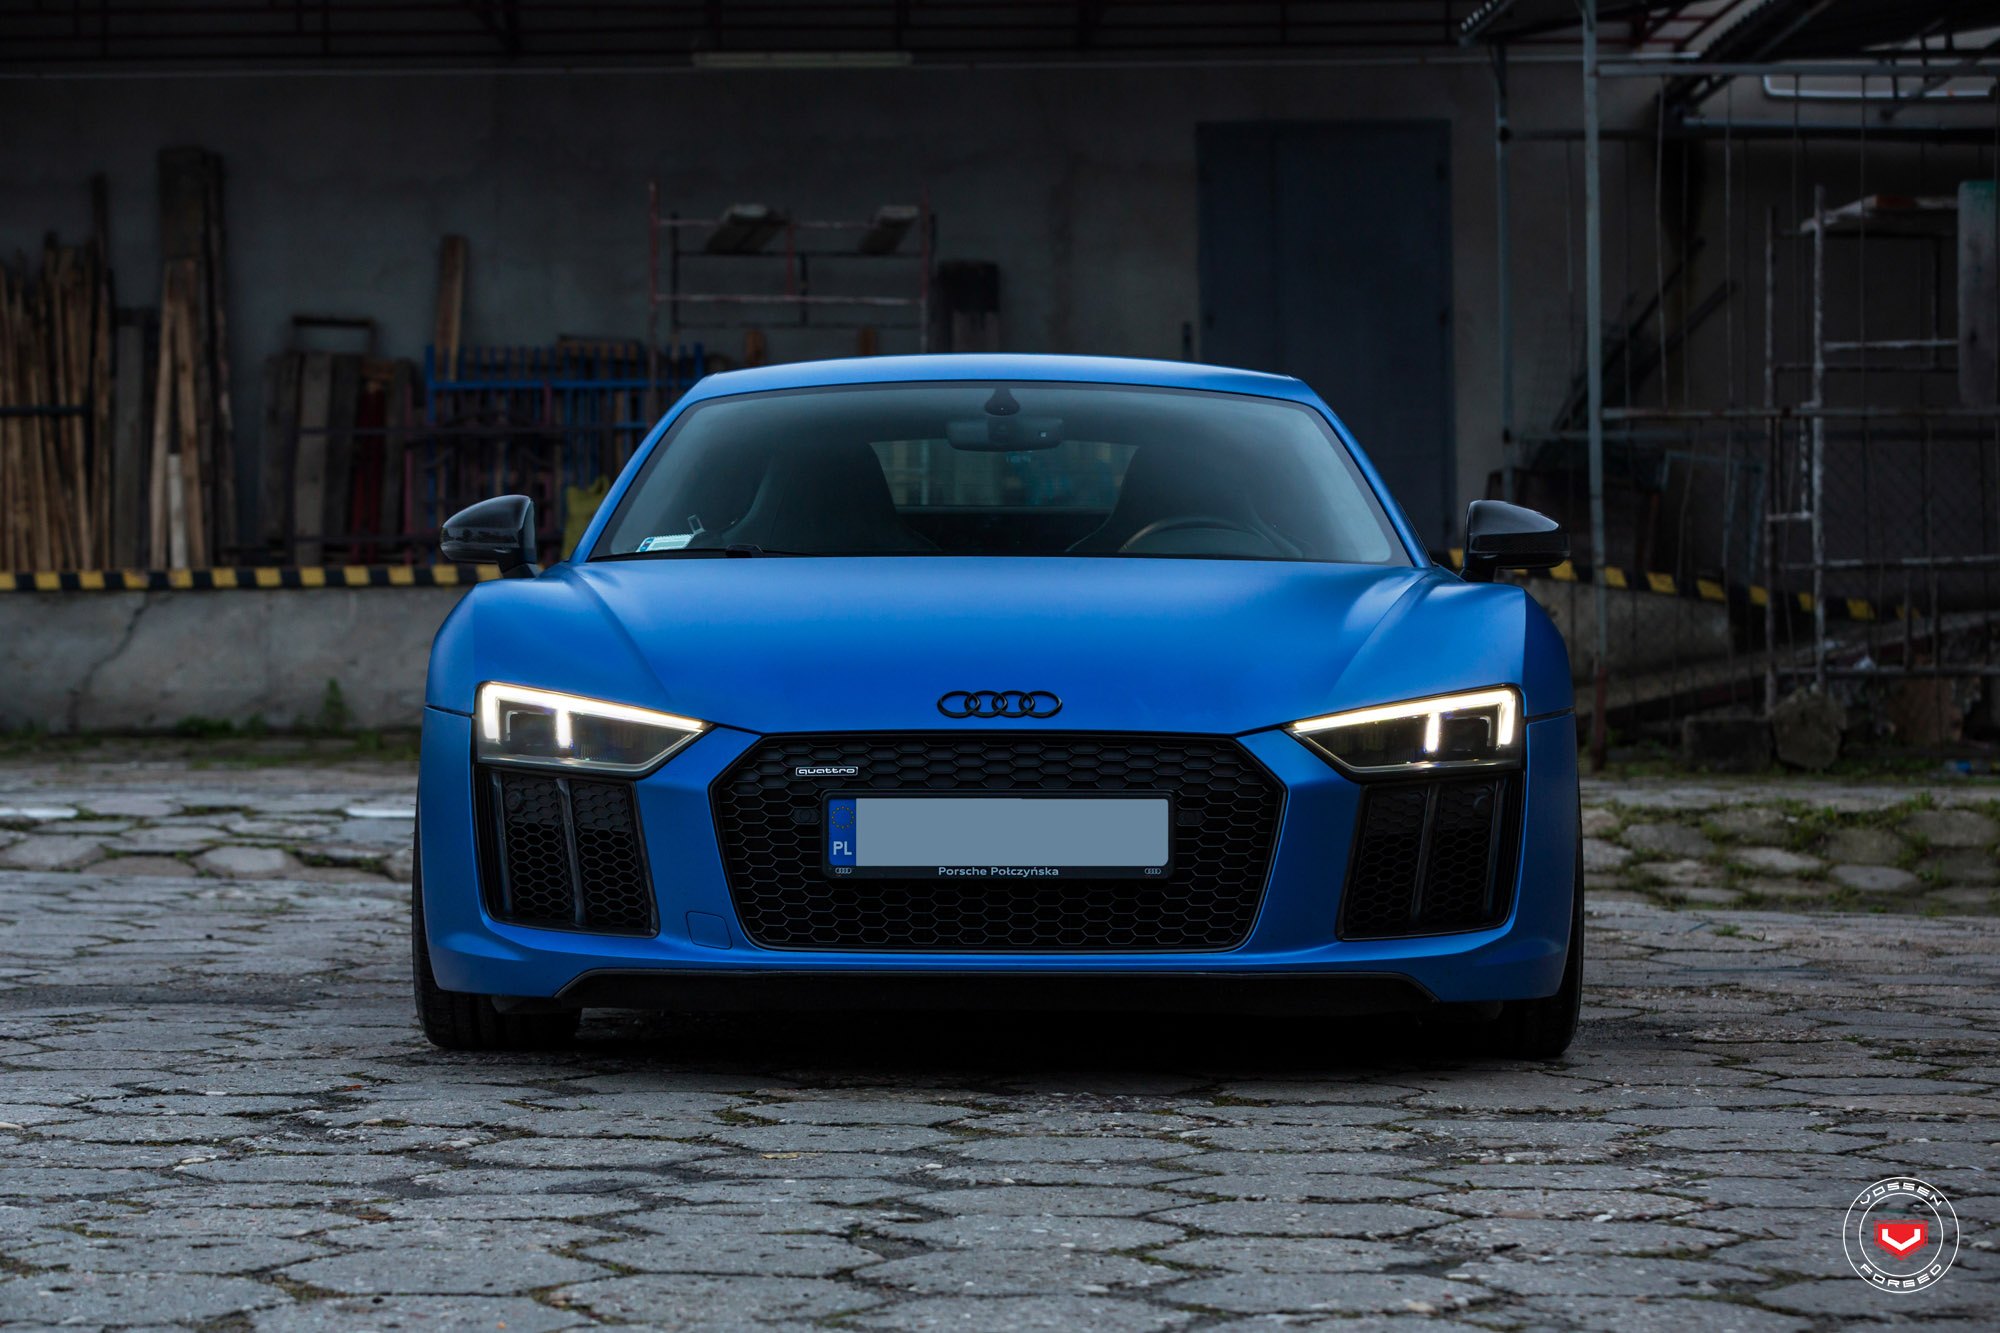 Matte Blue Audi R8 with Blacked Out Mesh Grille - Photo by Vossen Wheels